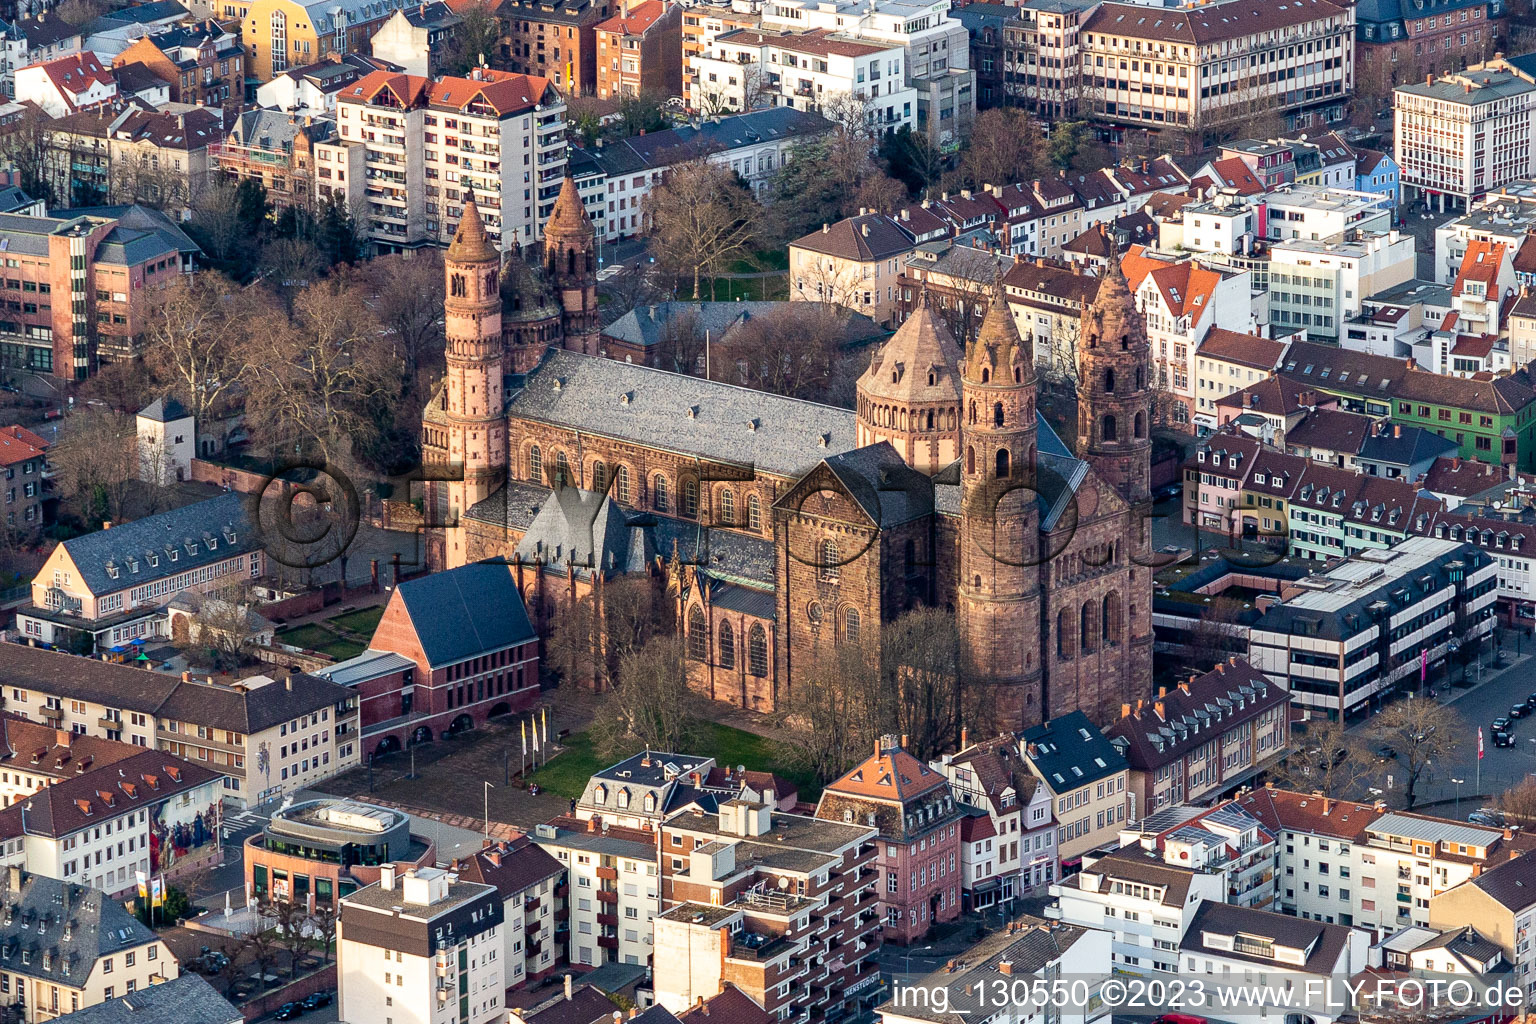 Aerial view of St. Peter's Cathedral in Worms in the state Rhineland-Palatinate, Germany